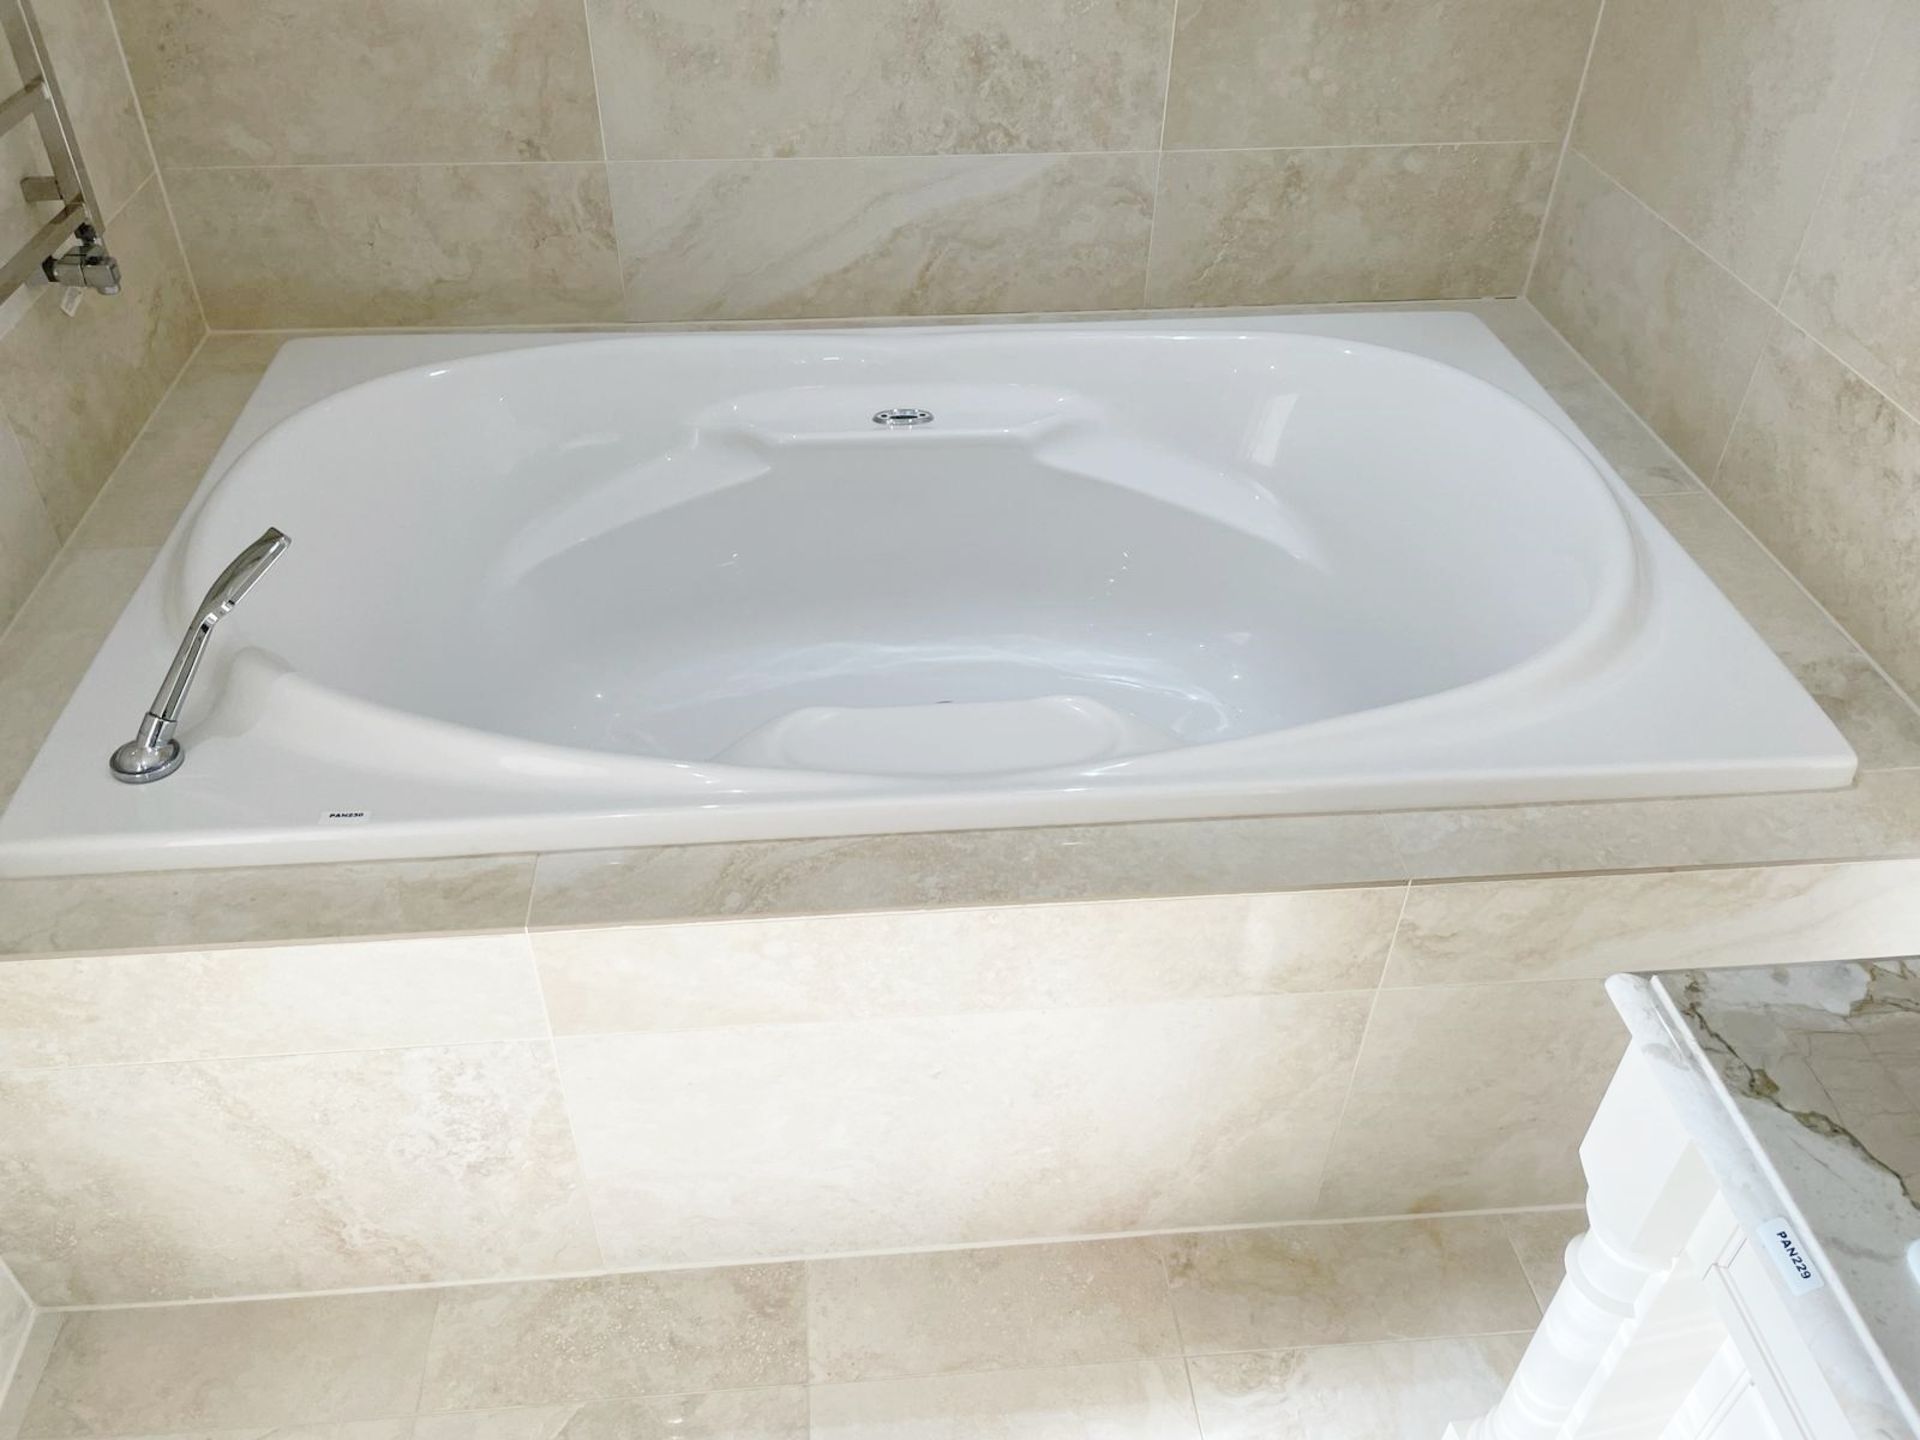 1 x AIRBATH Large Jacuzzi Spa Bath, with Axor Thermostat  - Ref: PAN230 Bed1/bth - CL896 - NO VAT - Image 3 of 12